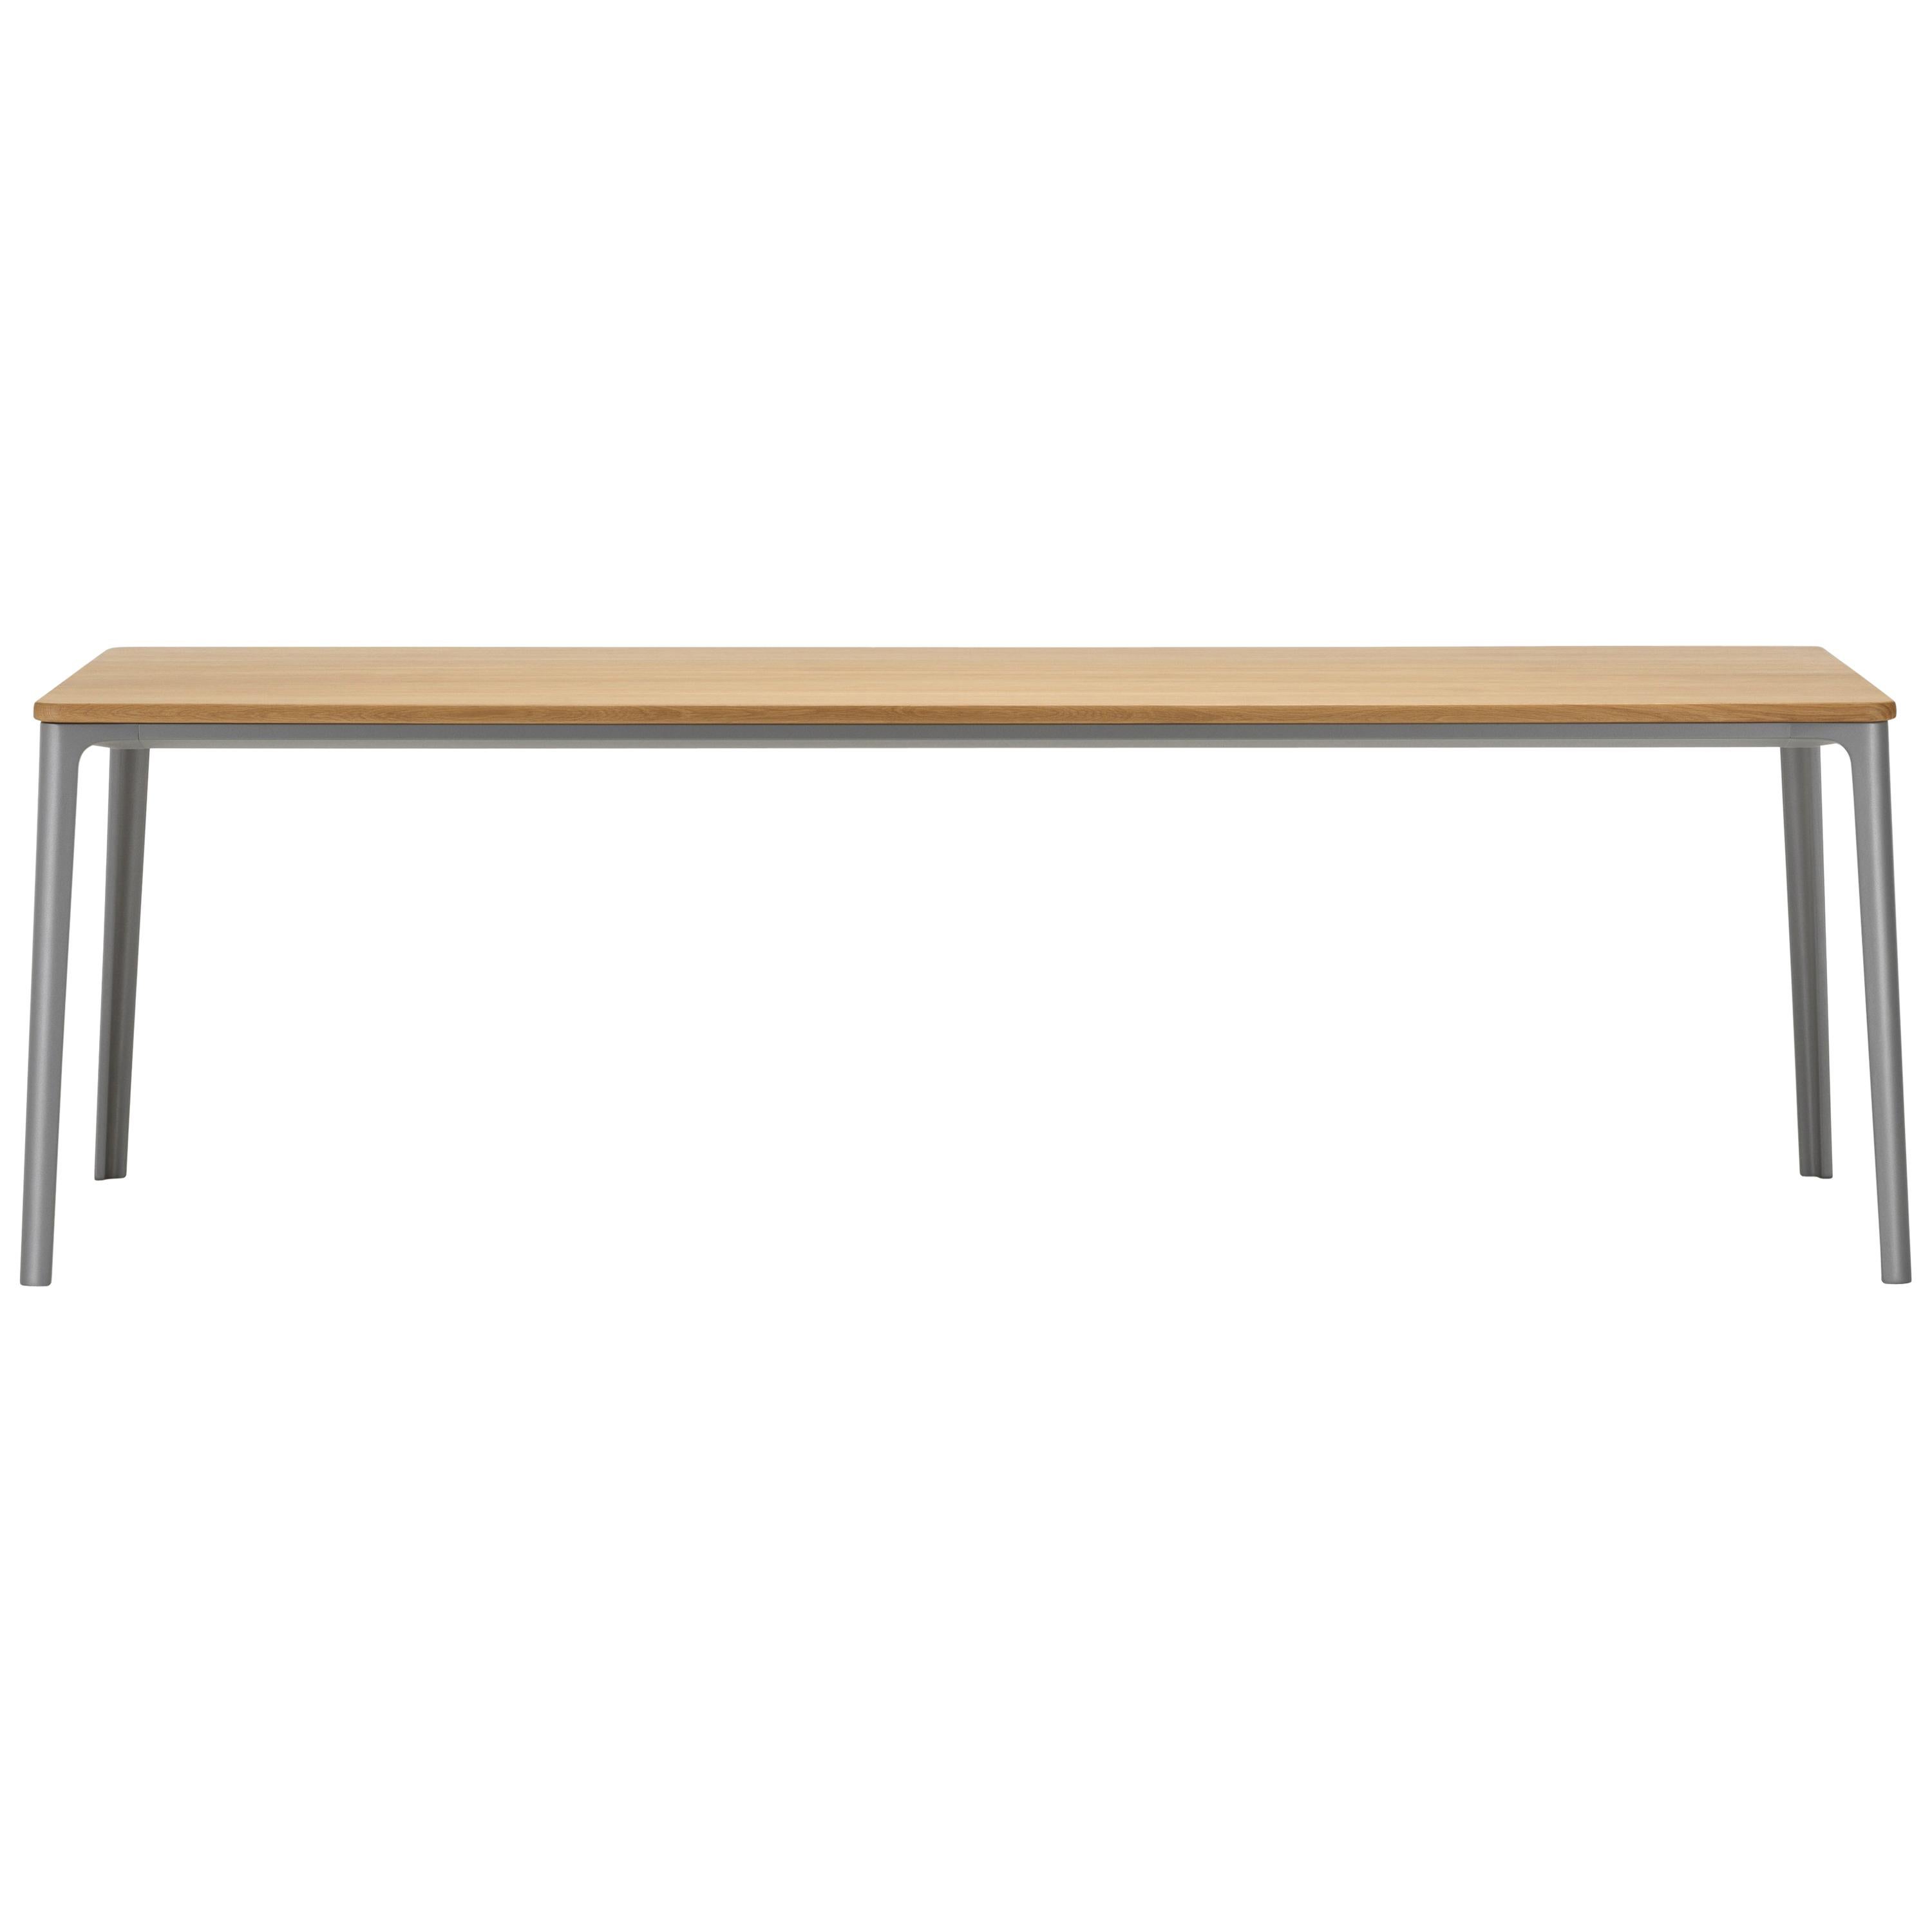 Vitra Plate Dining Table in Natural Oak and Earth Grey Base by Jasper Morrison For Sale